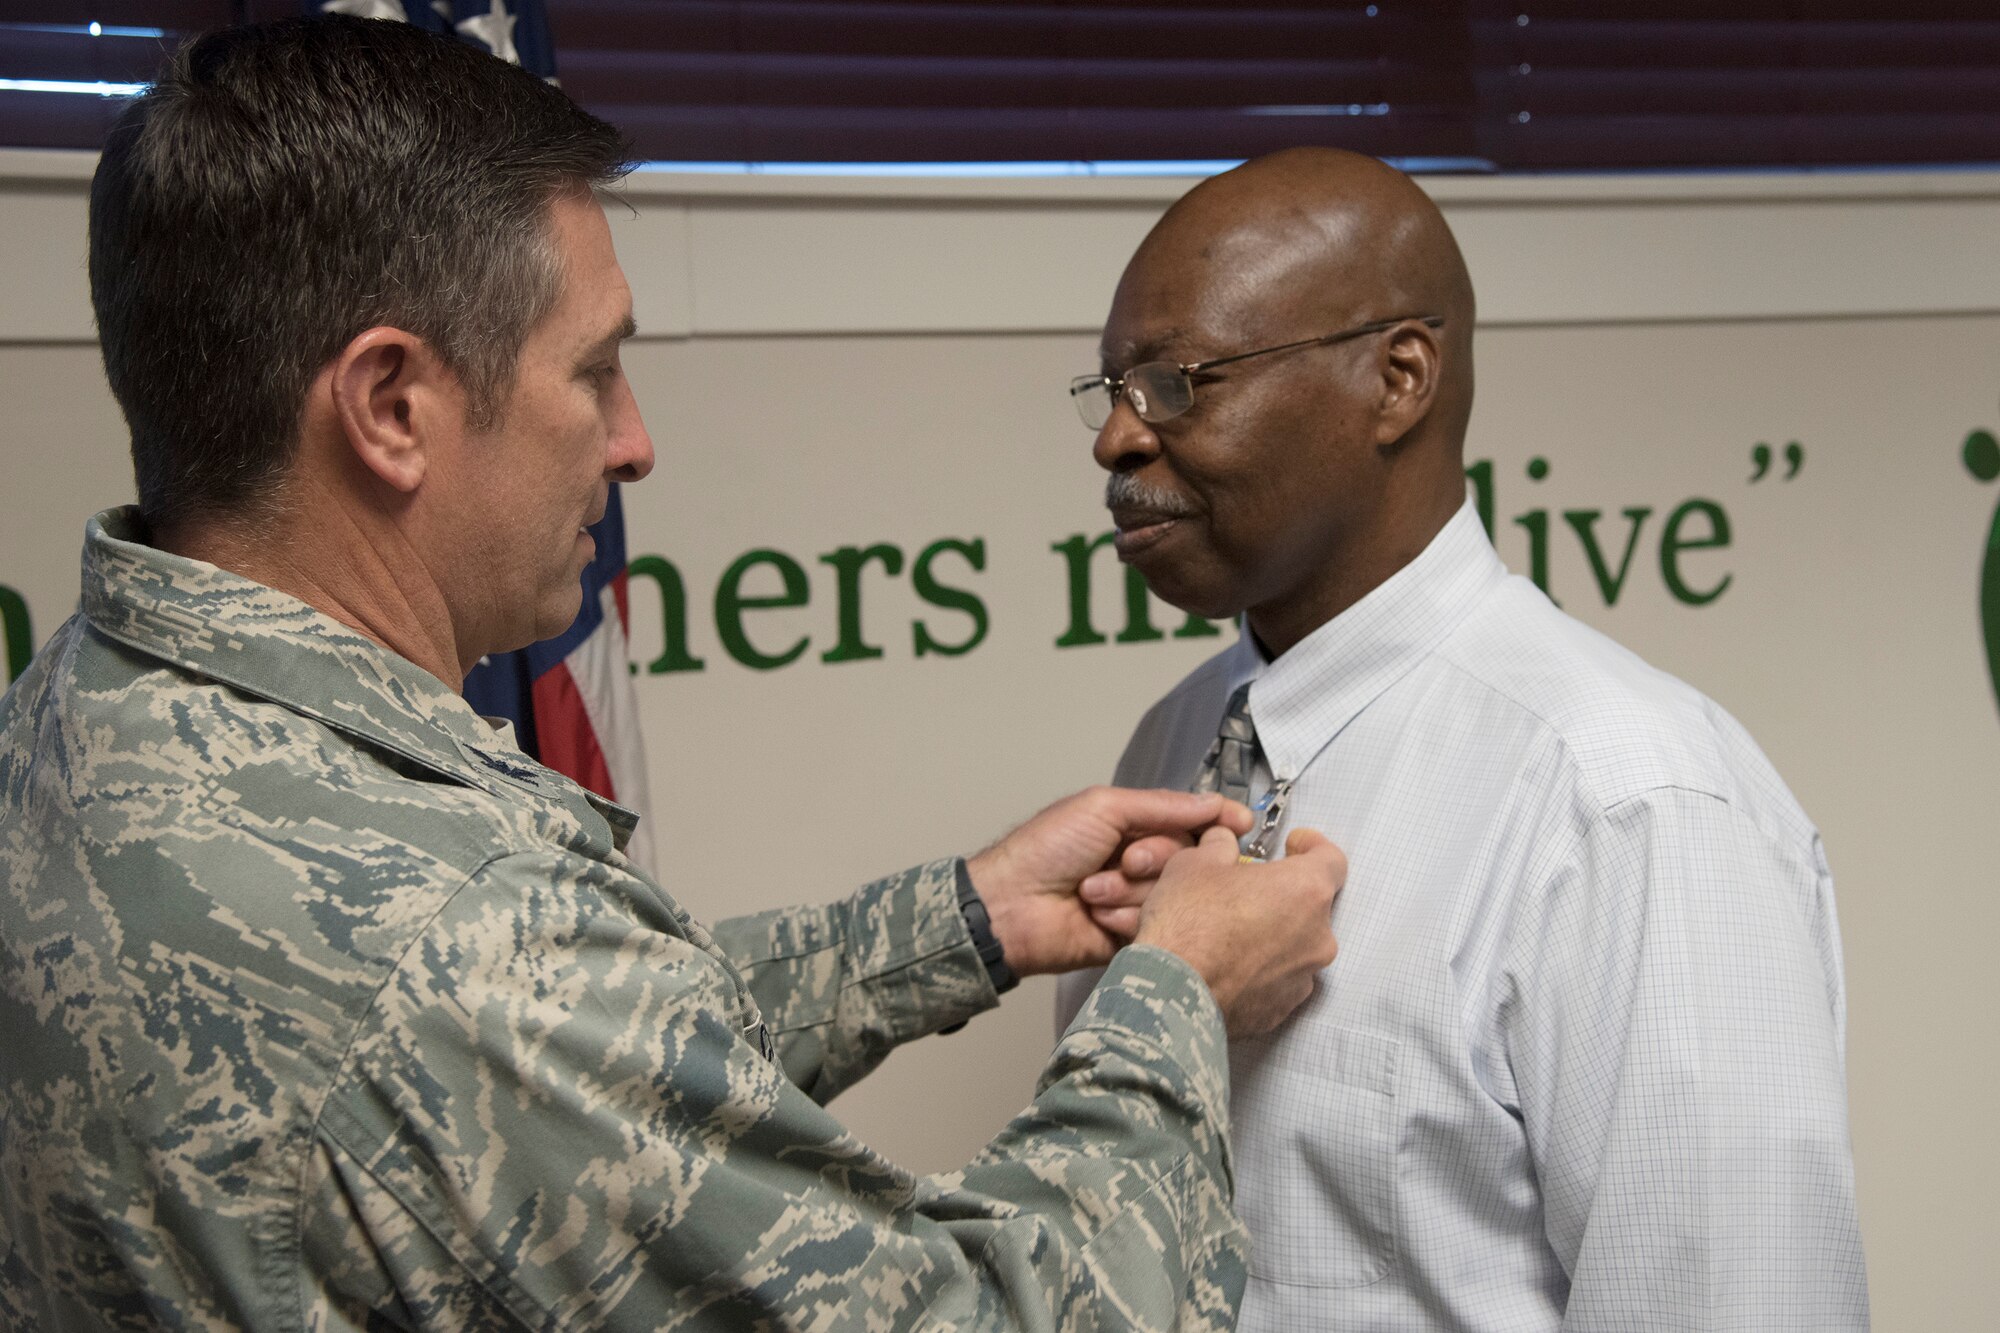 Col. John Chastain, left, 23d Maintenance Group (MXG) commander, places a medal on Arlonzo Nelson, 23d MXG computer assistant, during a retirement ceremony, March 29, 2018, at Moody Air Force Base, Ga. Nelson is retiring after 30 years of civilian service here. (U.S. Air Force photo by Airman Eugene Oliver)